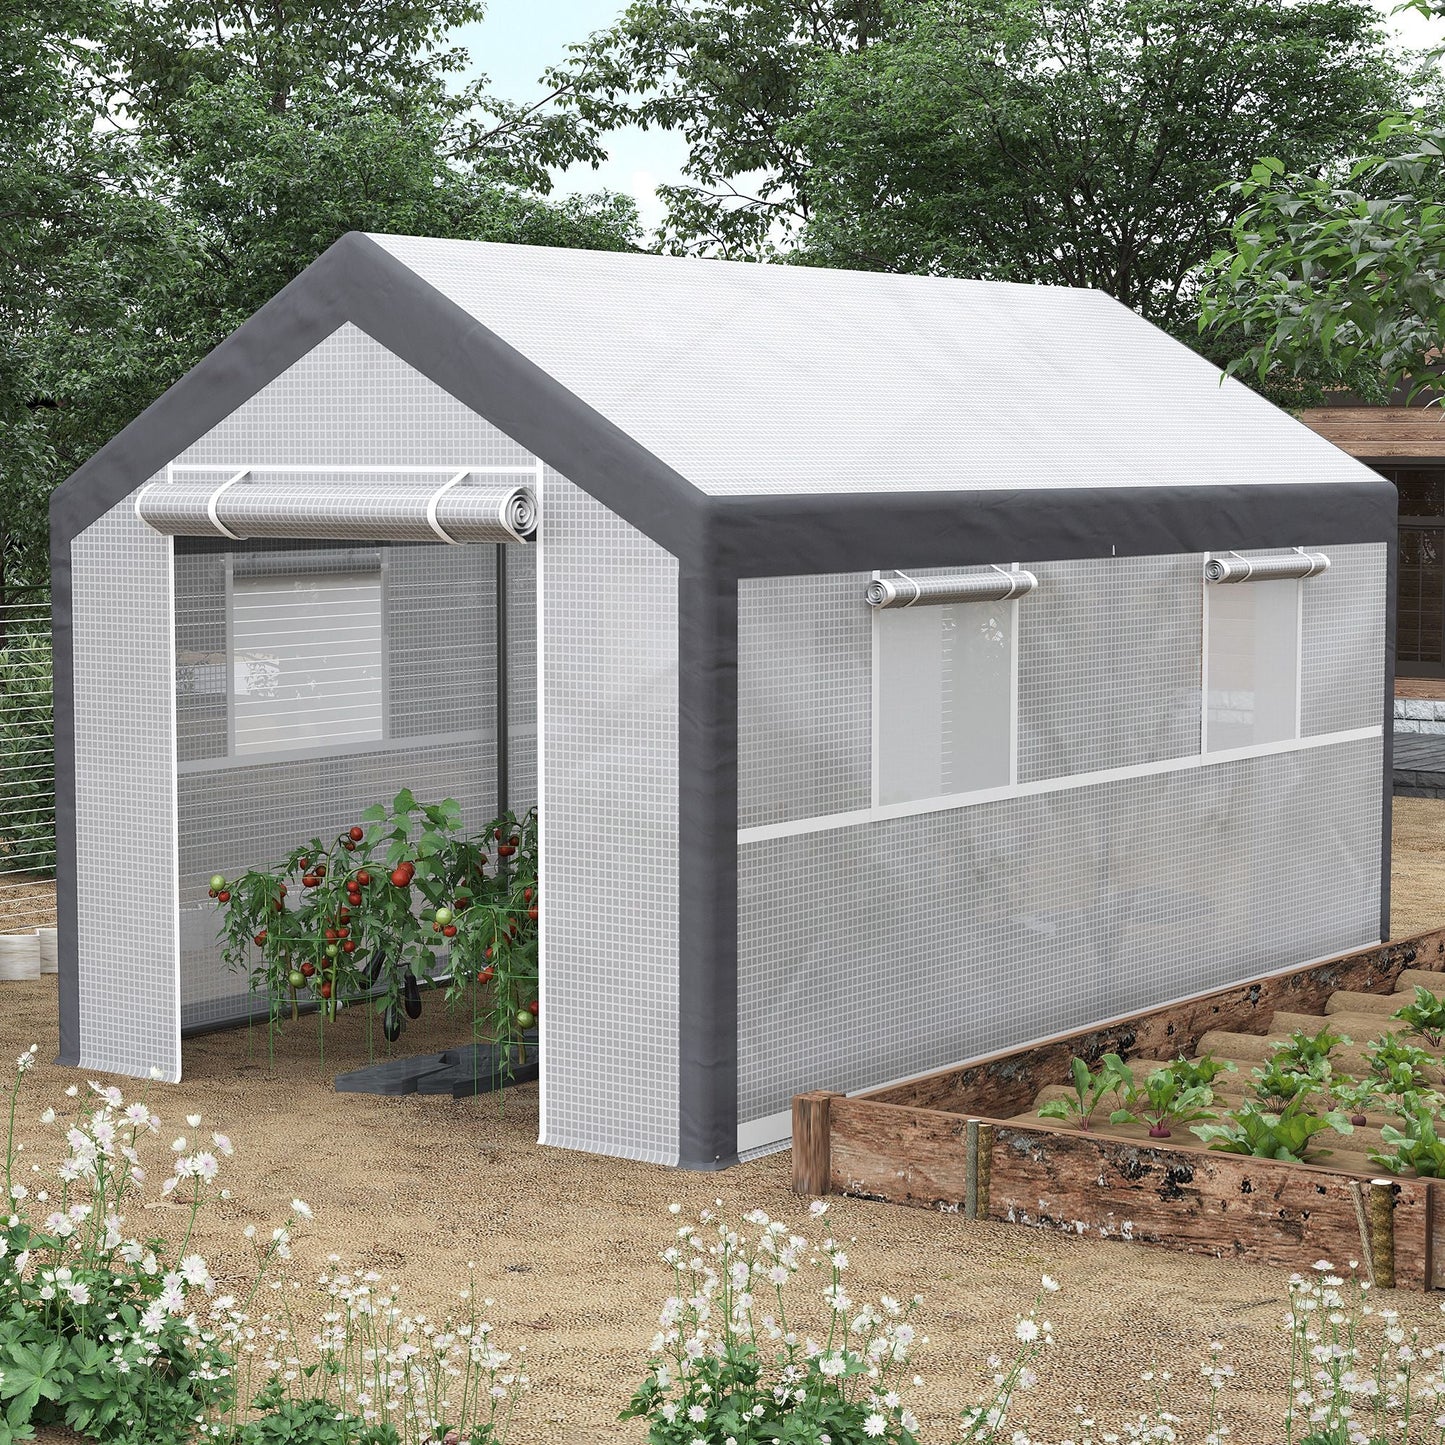 Outdoor and Garden-12'x7'x7' Outdoor Walk-In Tunnel Greenhouse, Garden Warm Hot House with Roll Up Windows, Zippered Mesh Doo & Weather Cover, White/Dark Grey - Outdoor Style Company